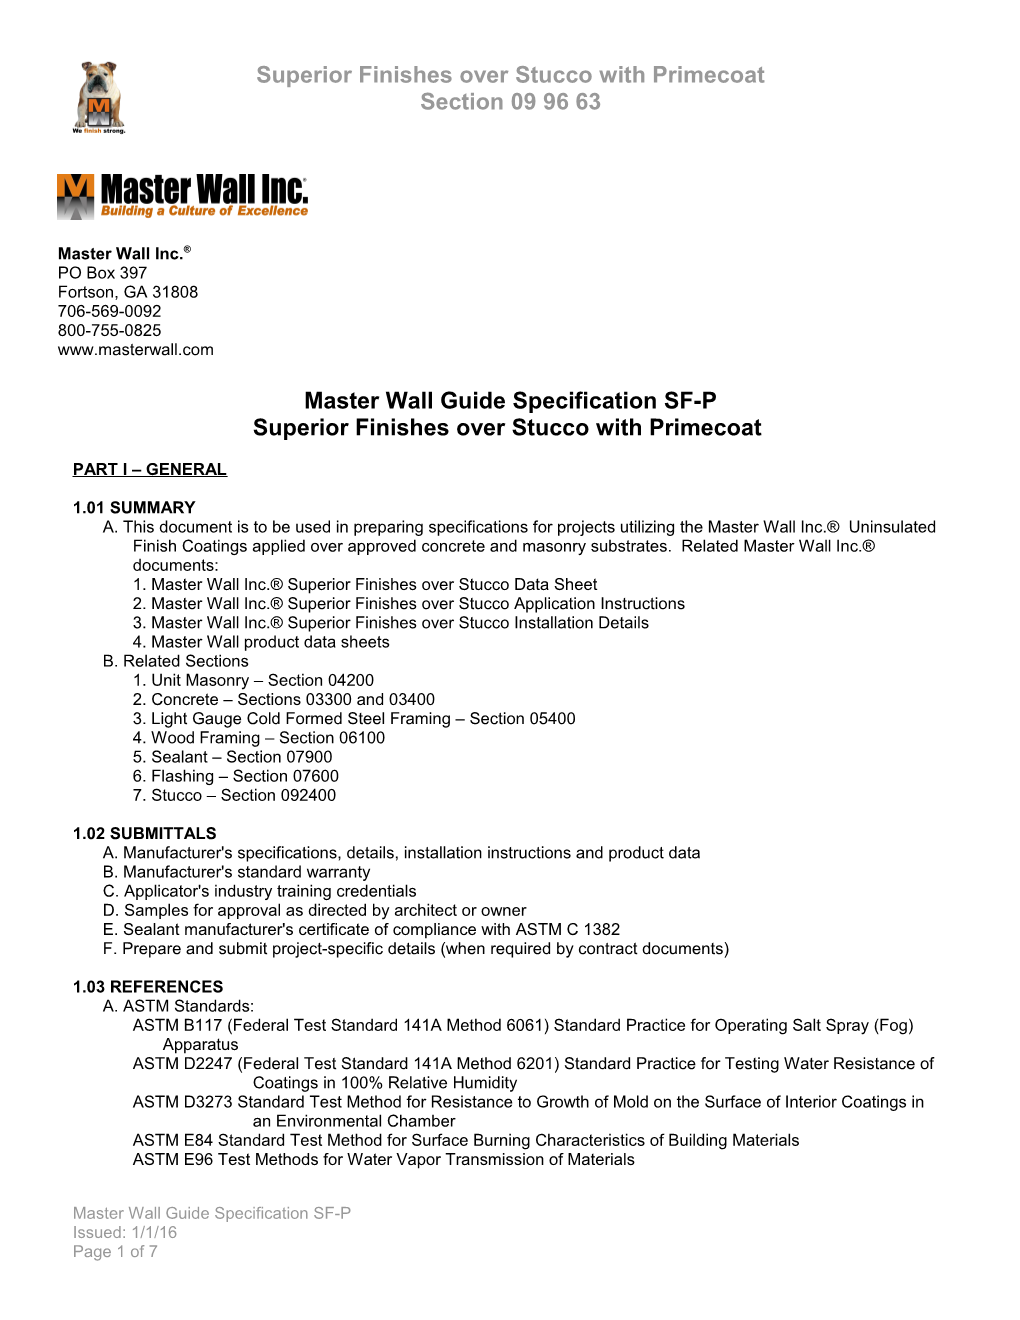 Master Wall Guide Specification SF-P